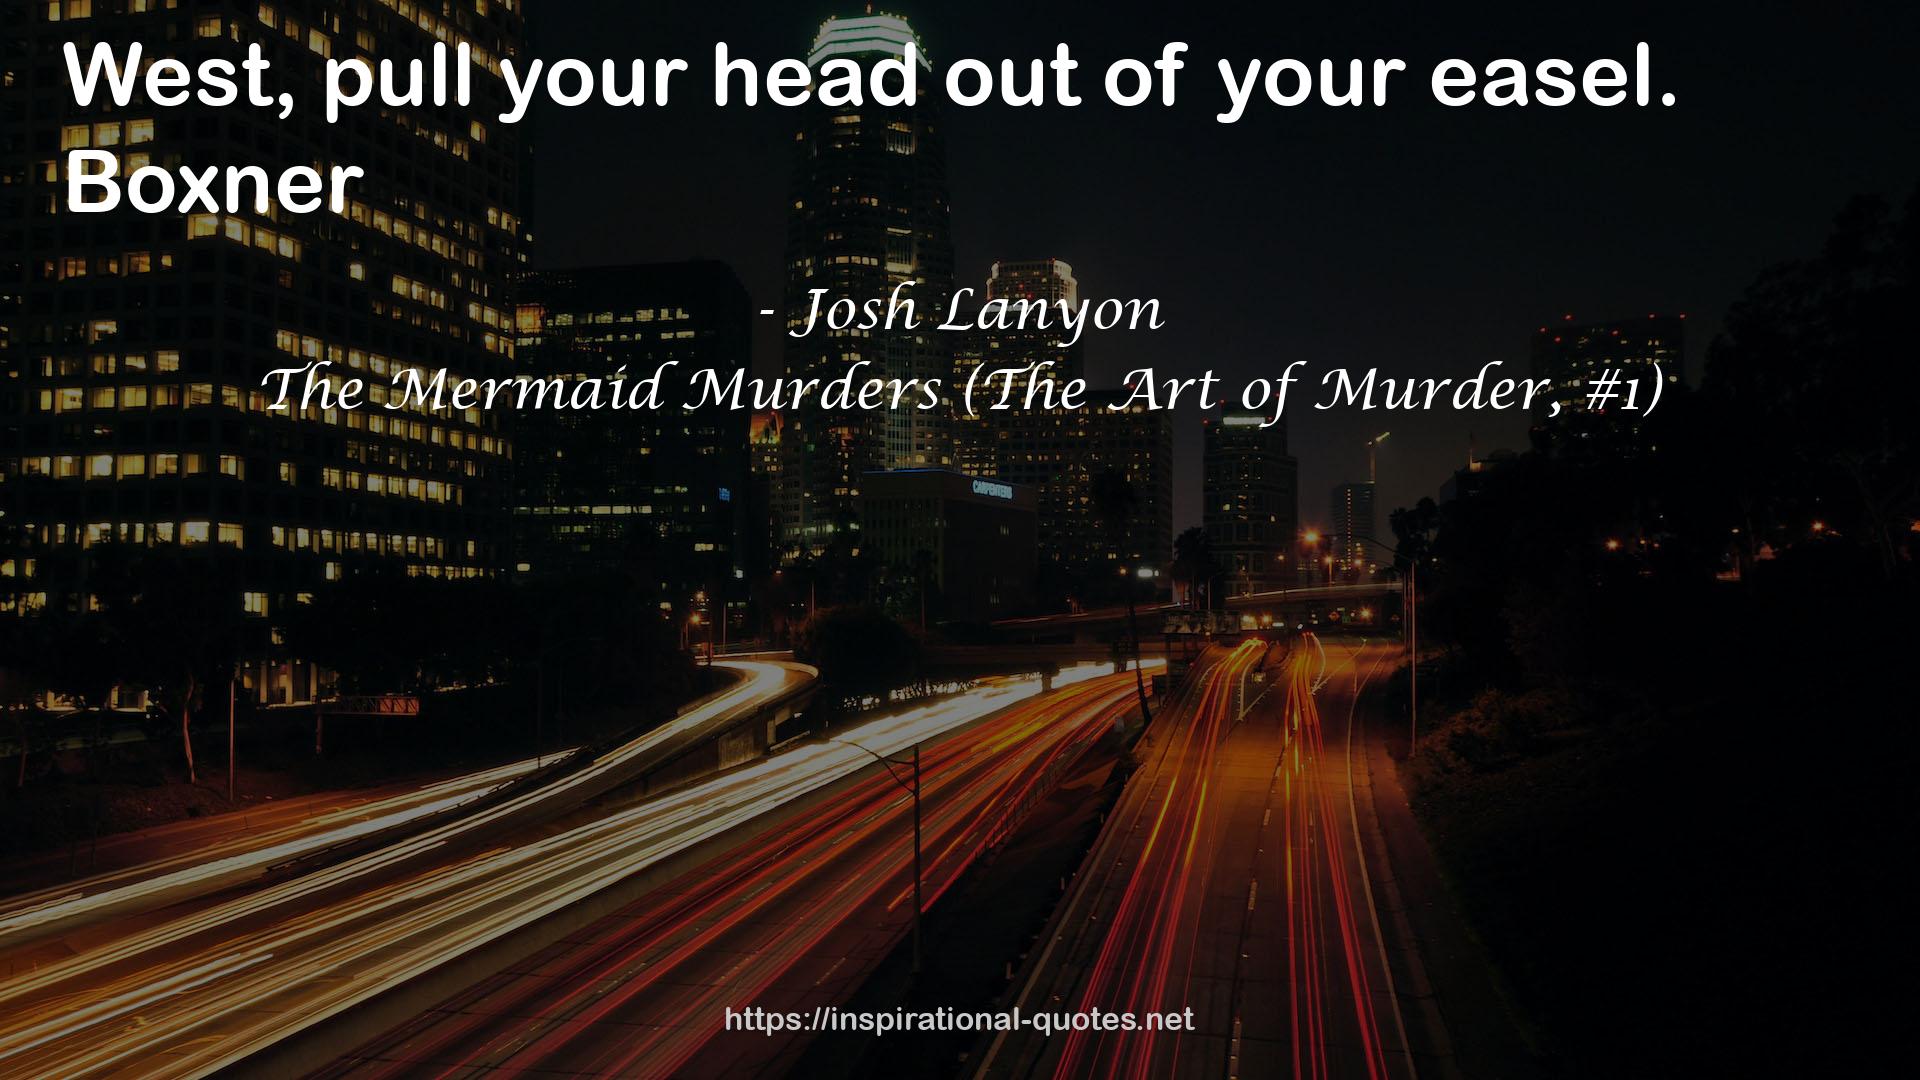 The Mermaid Murders (The Art of Murder, #1) QUOTES